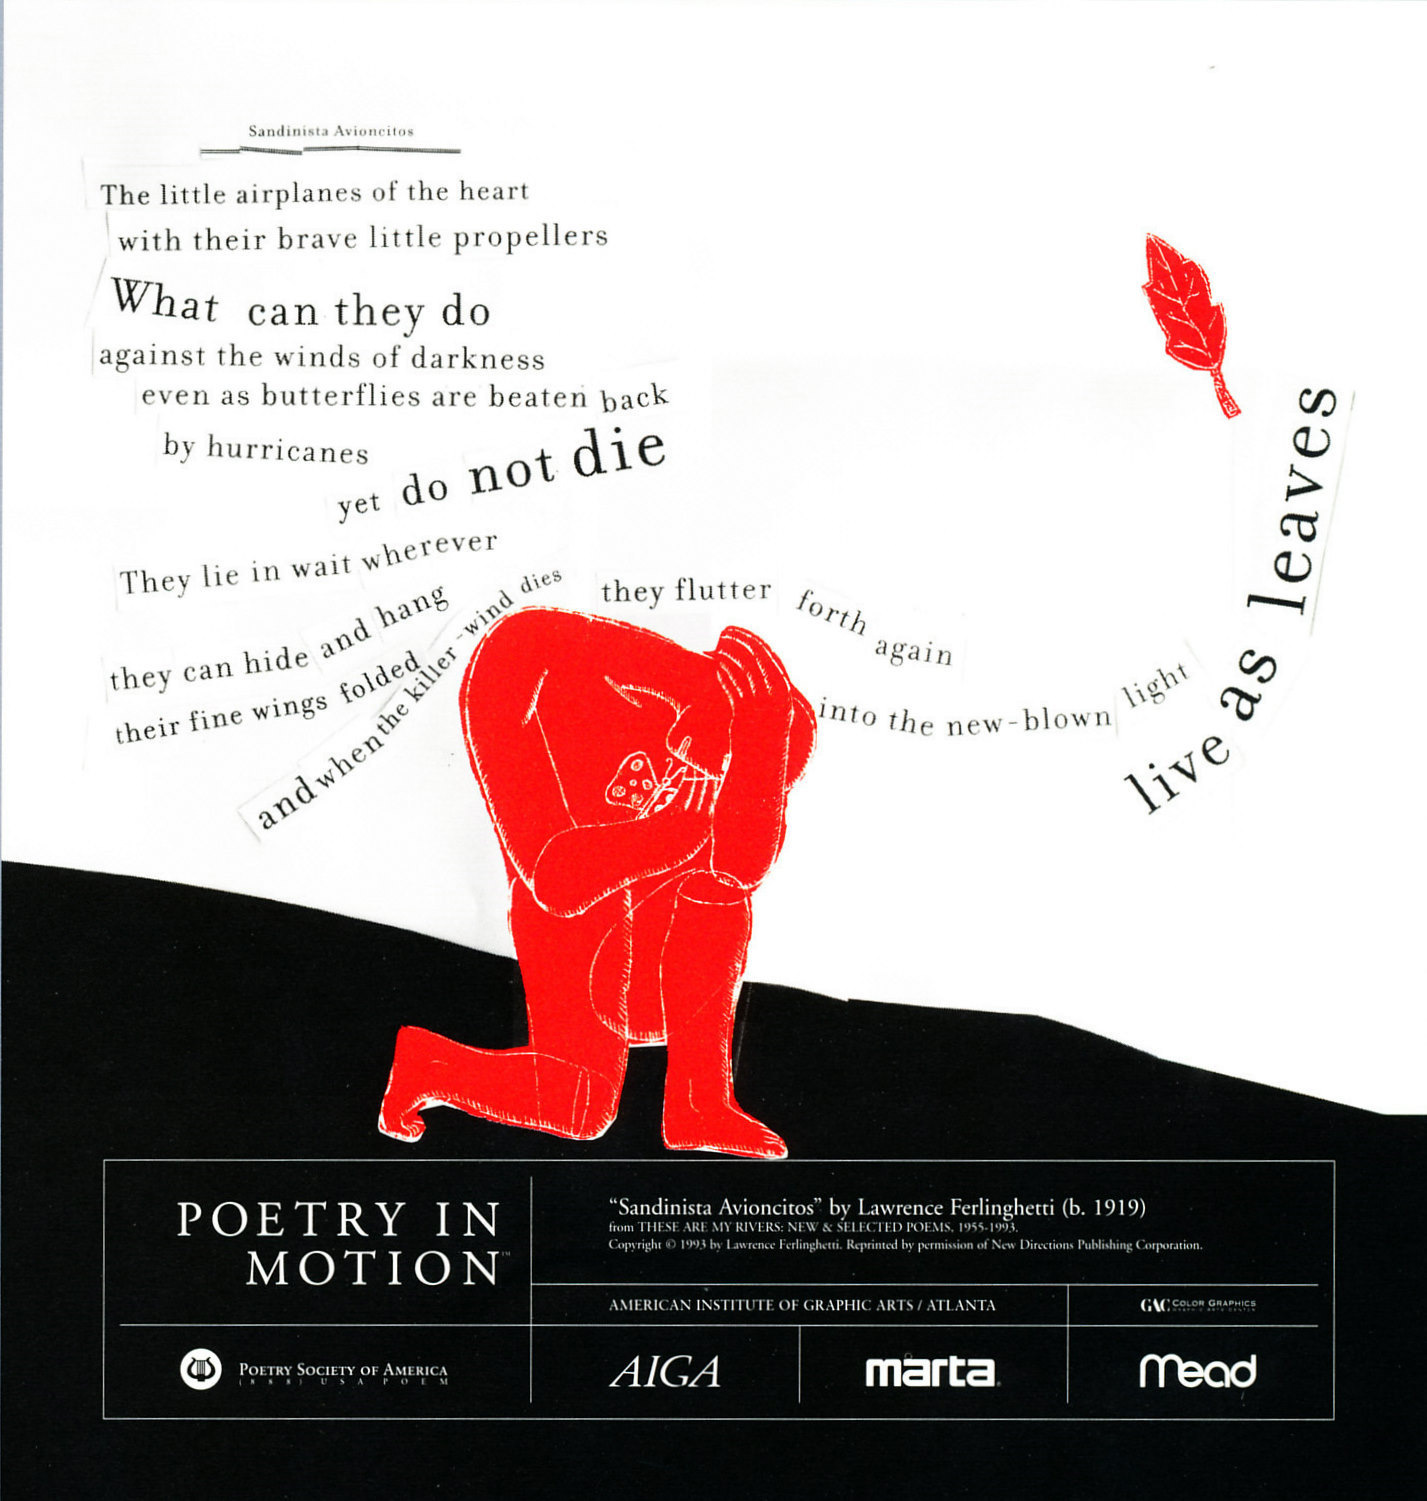 A white poster features the poem Sandinista Advioncitos by Lawrence Ferlinghetti. A red graphic depicts a kneeling person clutching a butterfly. A red leaf floats in the right corner.